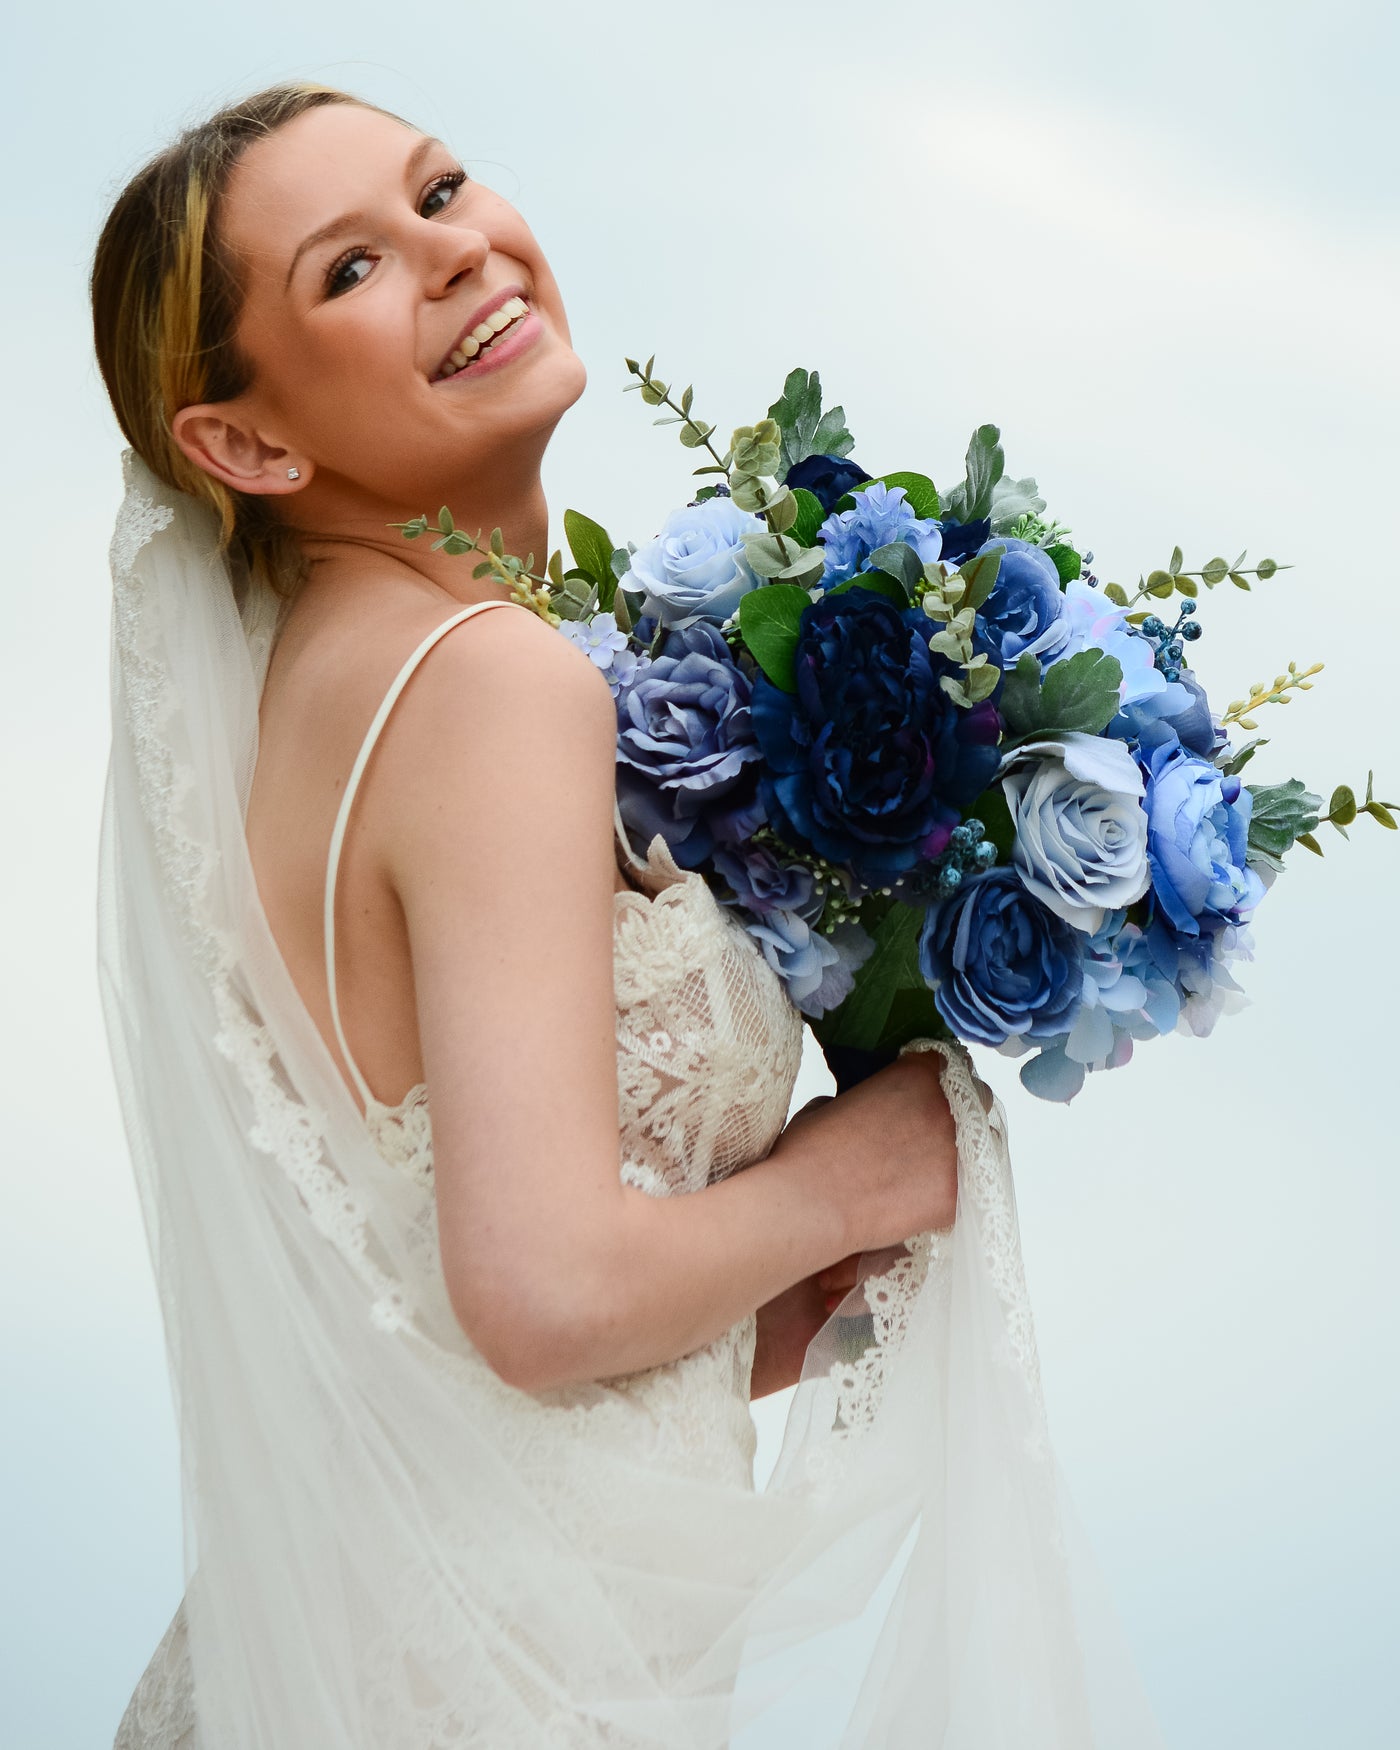 Rent a Rose-Bridal Bouquet- Navy, white and pale blue roses with Eucalyptus. Rent for five days for $98.00